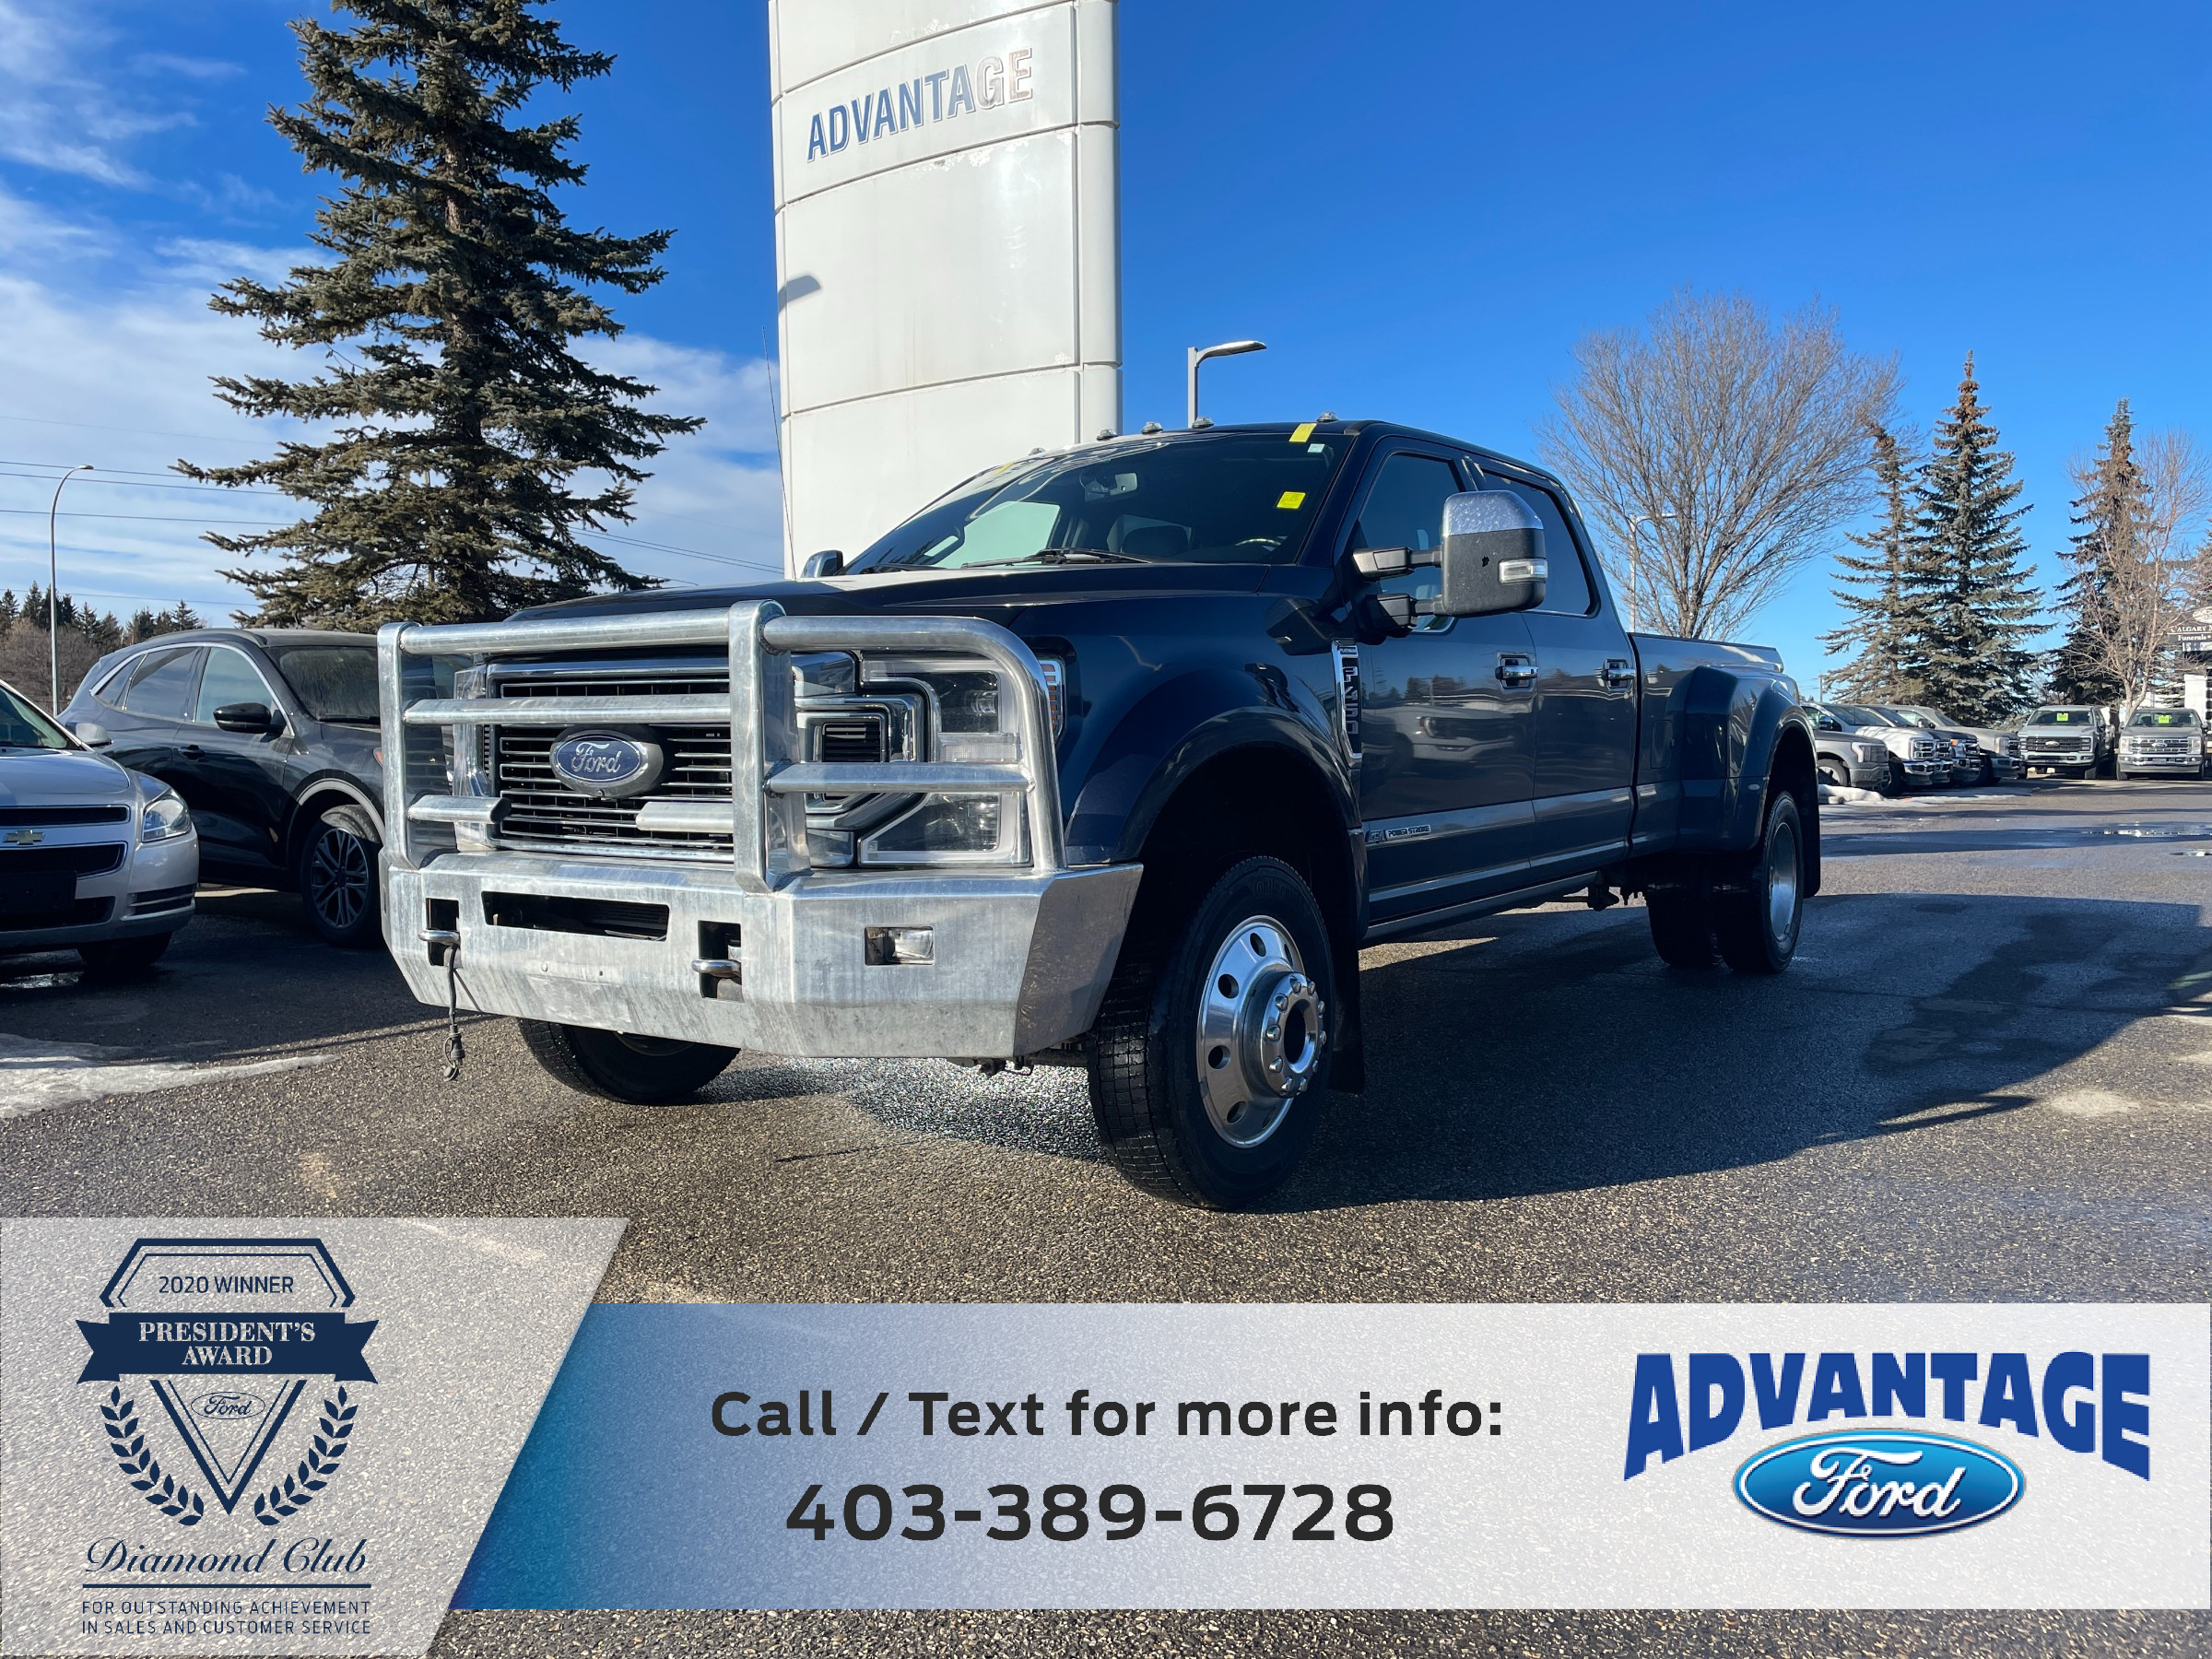 2020 Ford F-450 Platinum PRICED TO SELL NOW, Twin Panel Moonroof, 